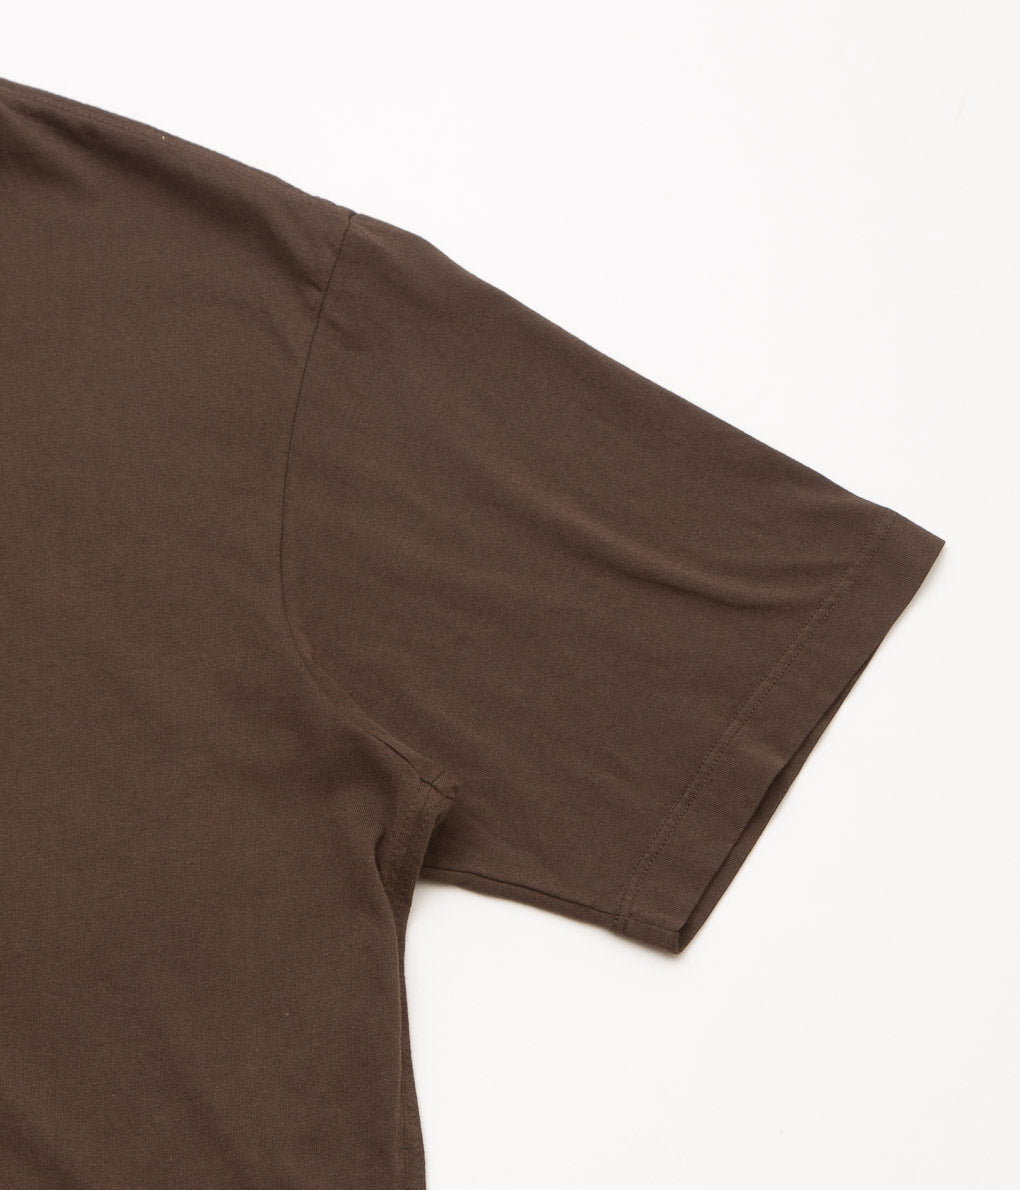 LADY WHITE CO. " ATHENS T-SHIRT"(FIELD BROWN)